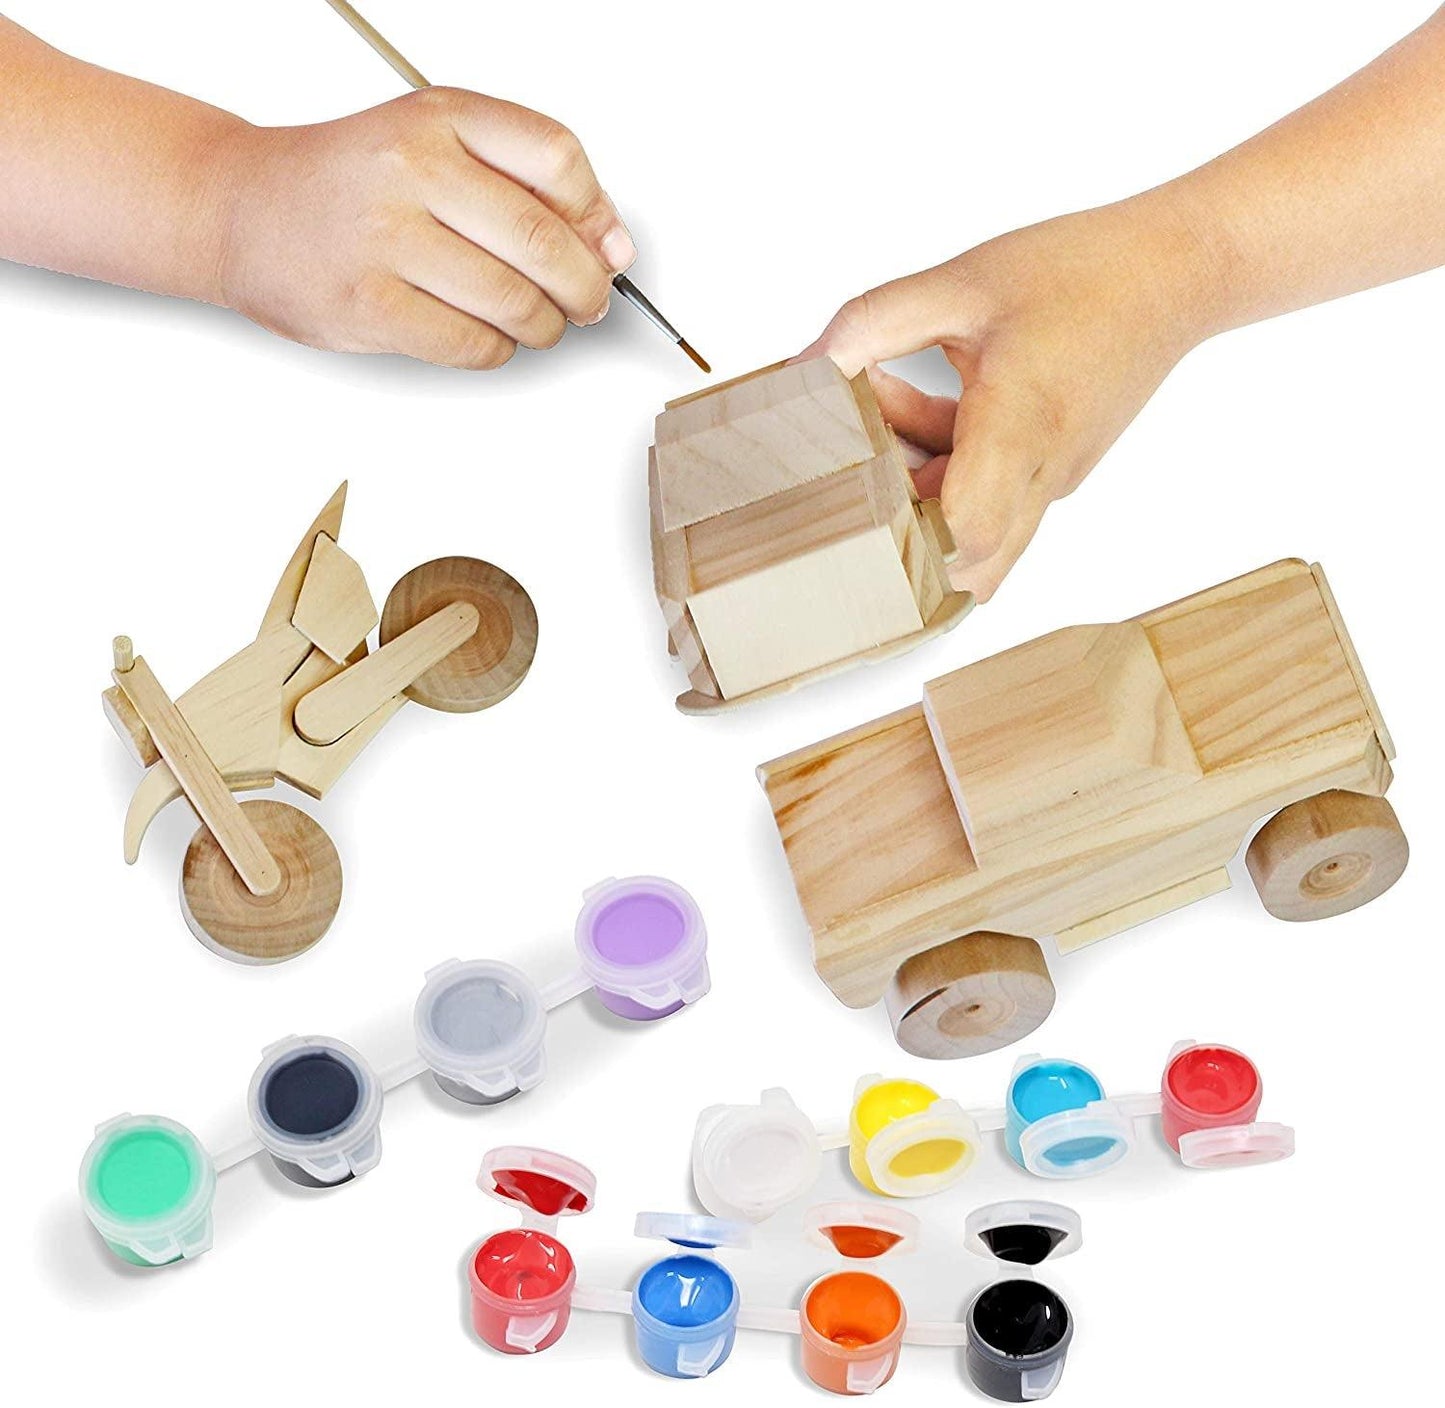 Kids Craft Kit Build & Paint Your Own Wooden Race Car Art & Craft Kit DIY Toy Make Your Own Car - WoodArtSupply